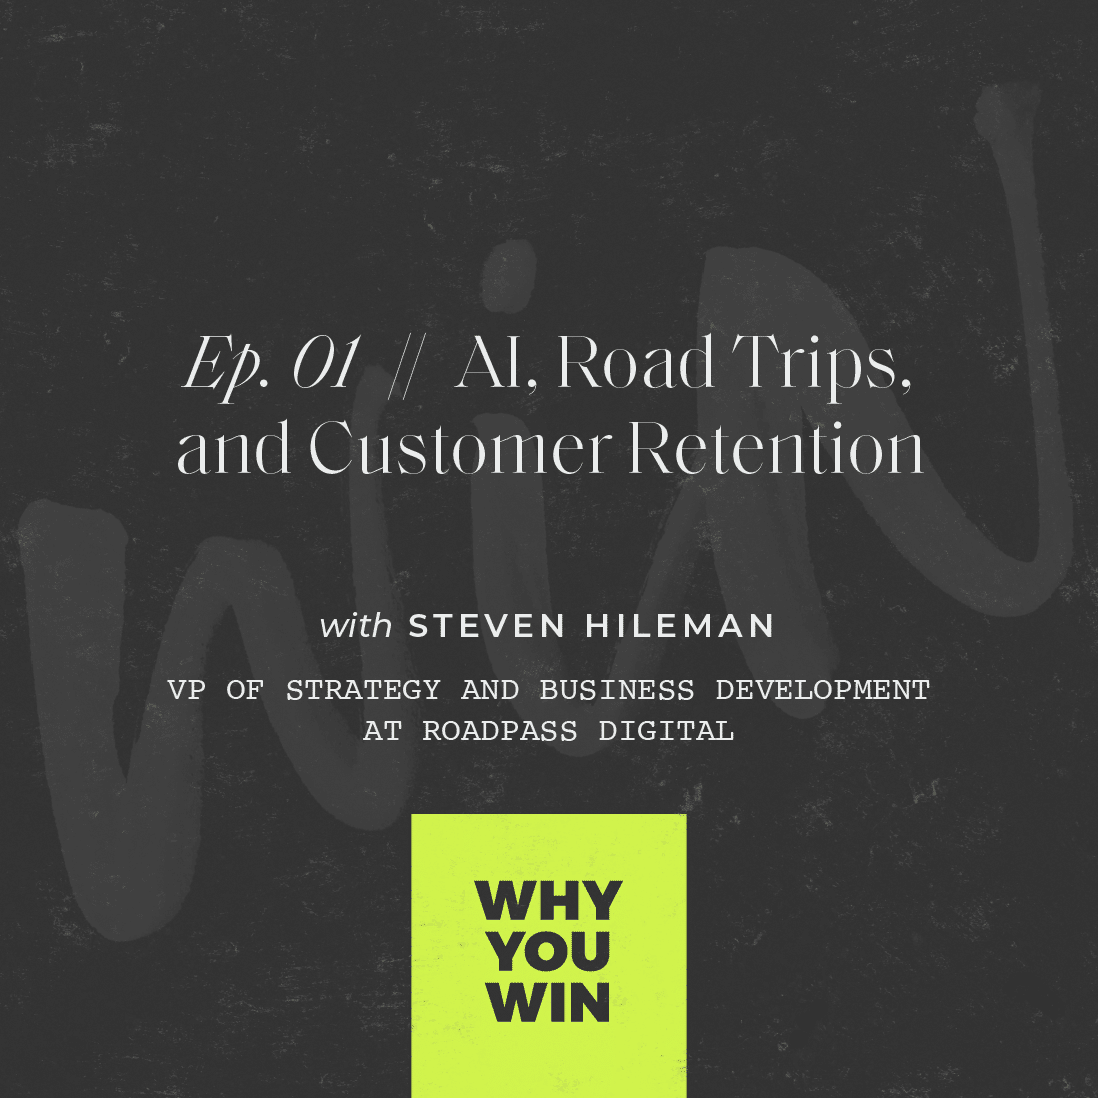 AI, Road Trips, and Customer Retention with Steven from Roadpass